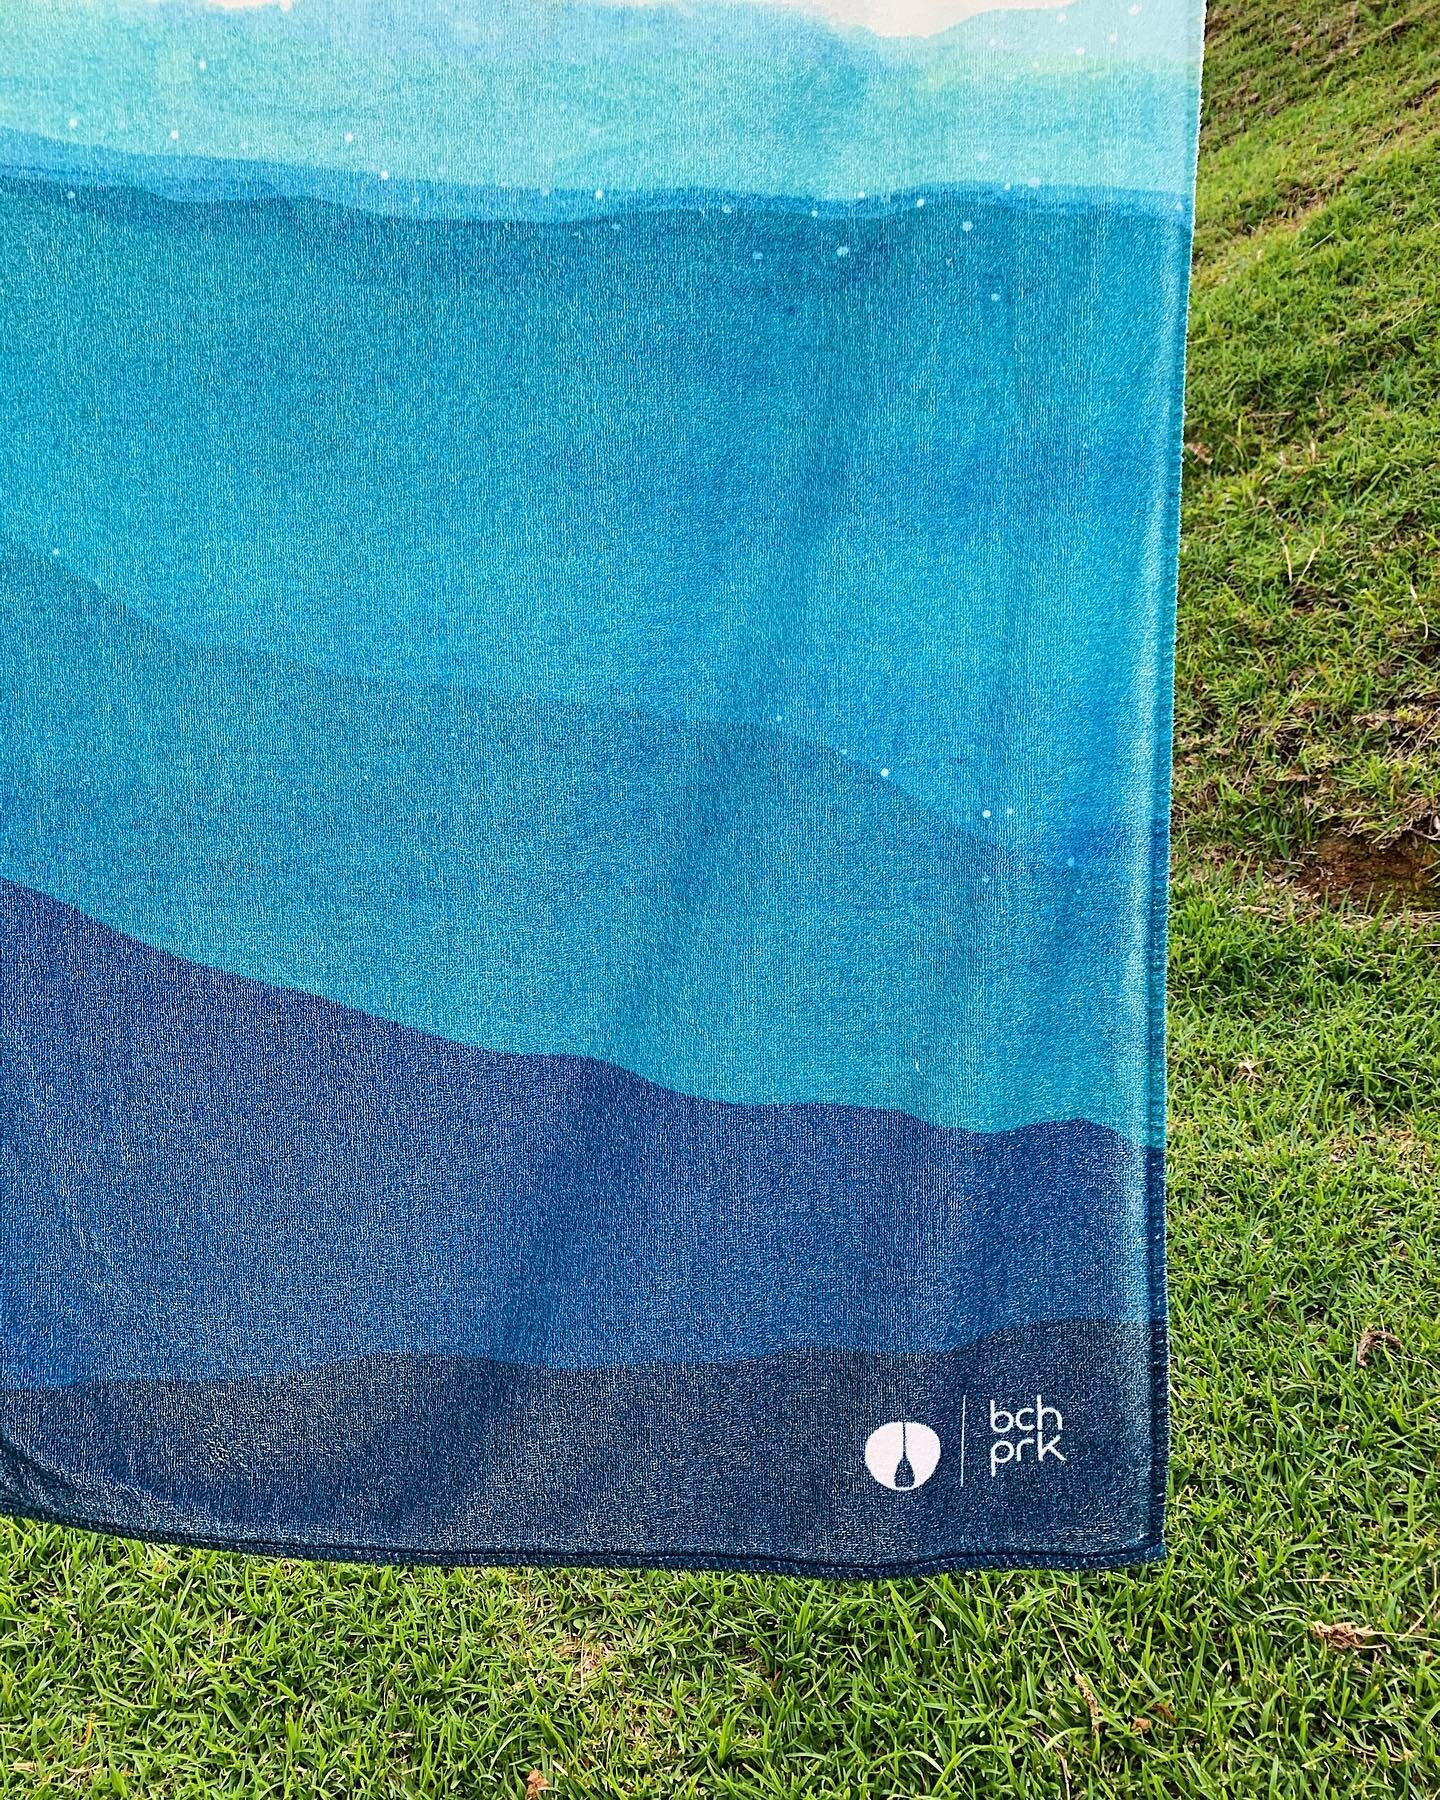 Let&rsquo;s hang... only a few of our first edition collab towels left!
.
.
Link in bio 💥 enjoy 🌊🍃
.
.
#letsgobeach #hawaii #hilife #beachtowel #beachpeople #beachvibes #livesimply #towel #shopsmall #enjoy #beach #aloha #beachpark #bchprk